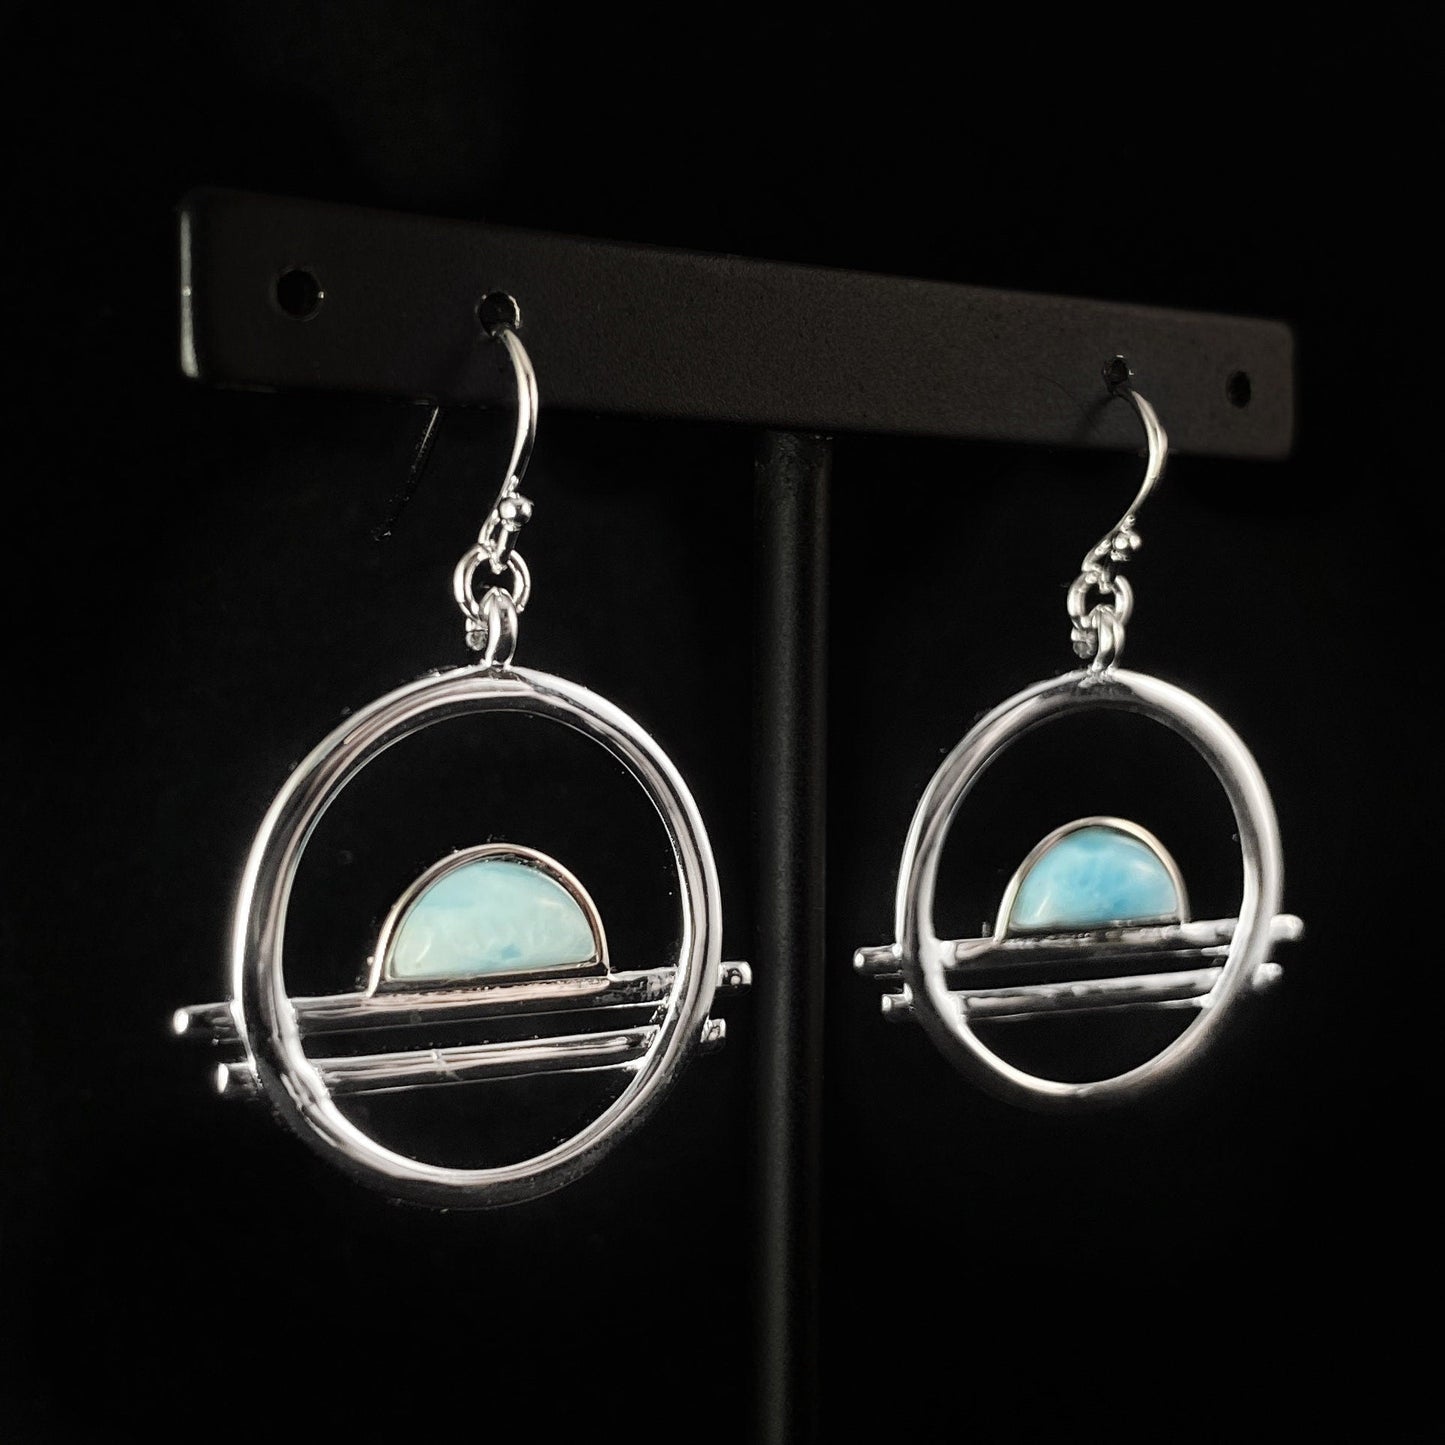 1920s Silver Abstract Statement Earrings with Blue Larimar Stone Accents - Ocean Drive